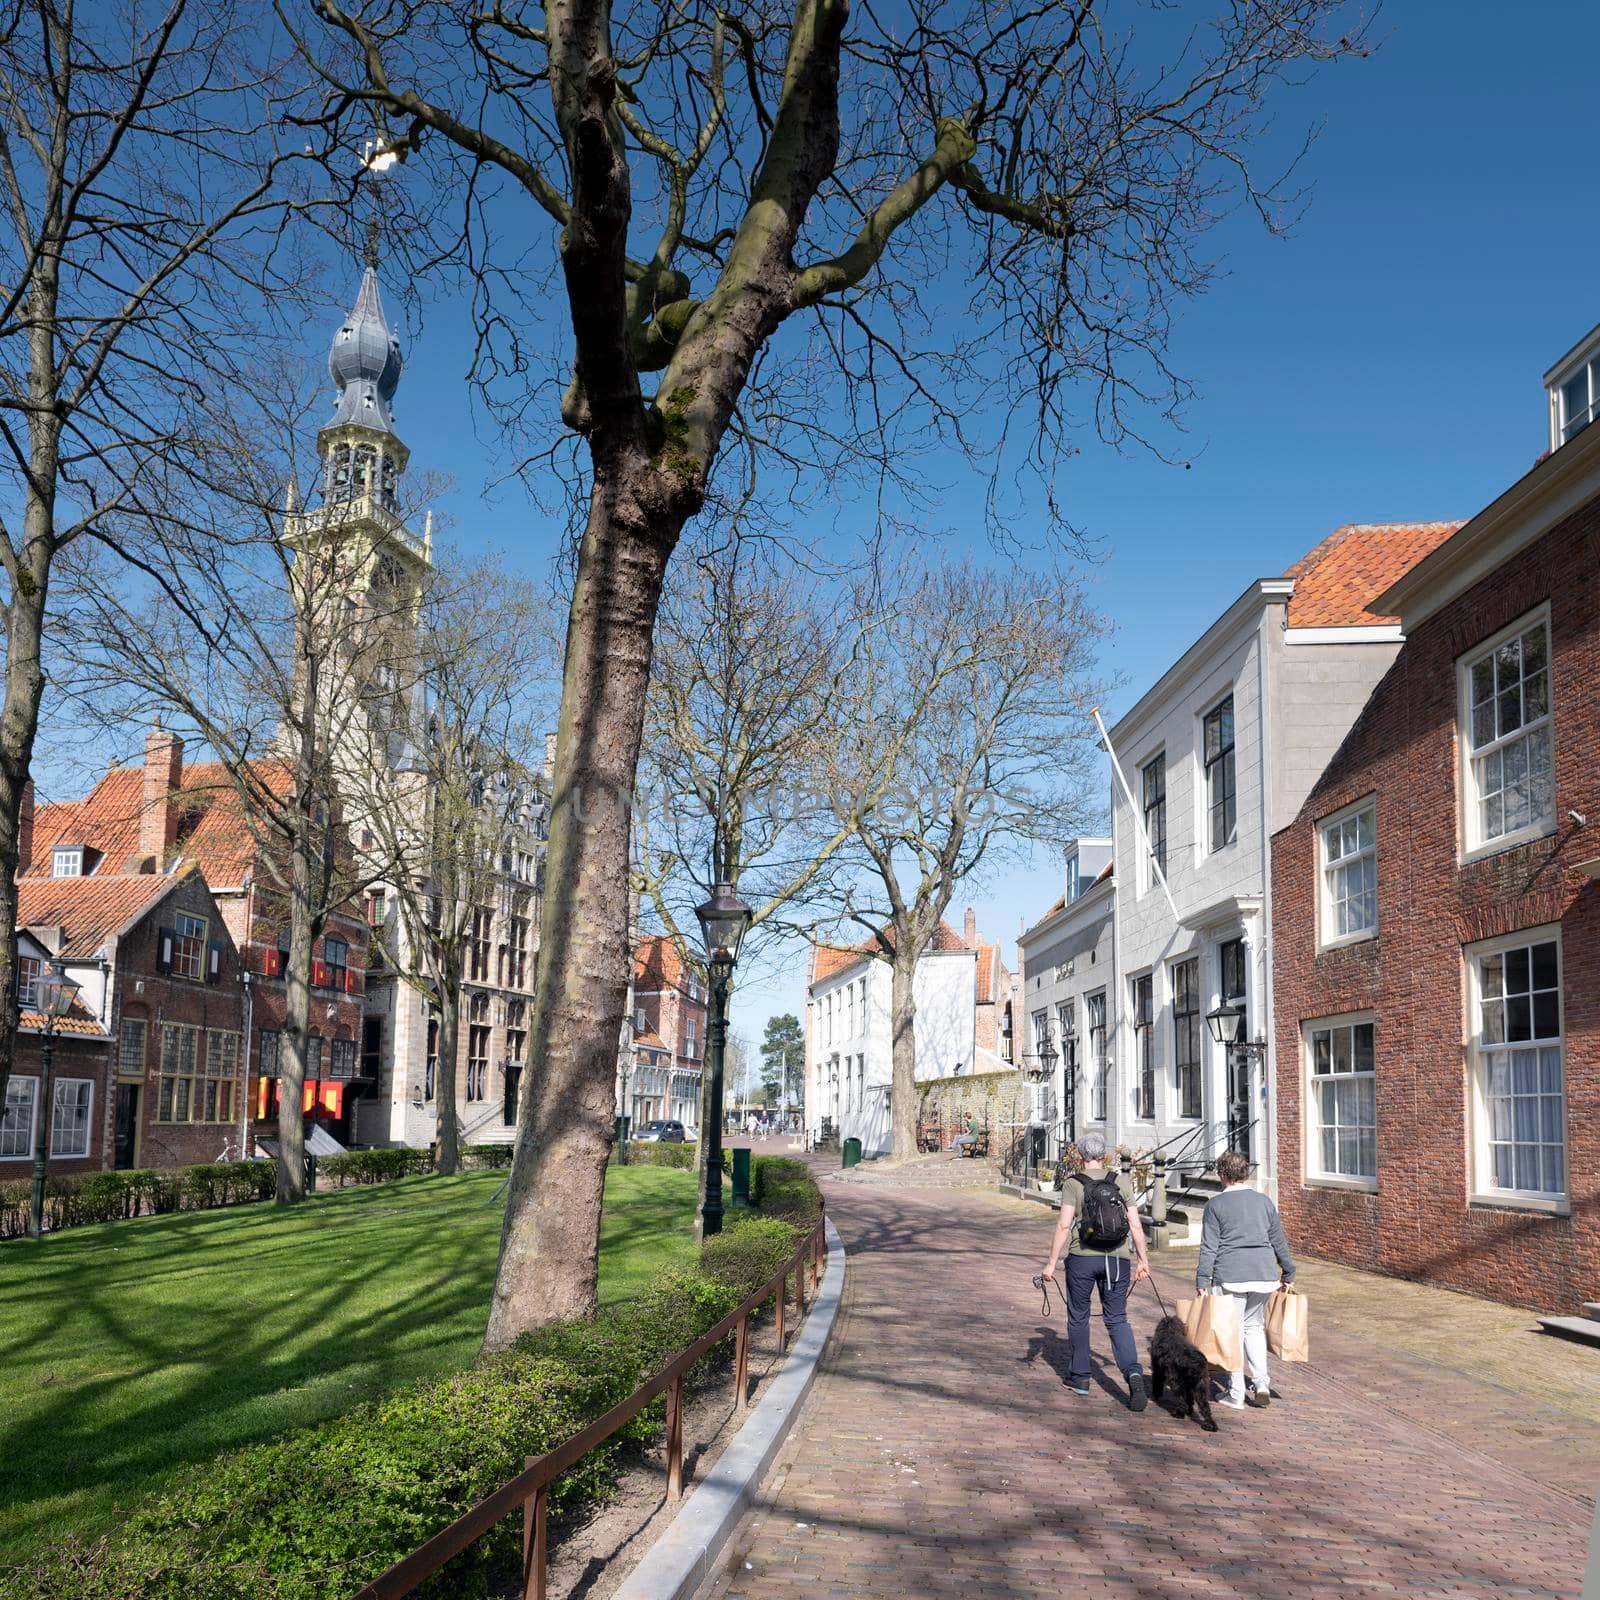 Veere, Netherlands, 31 march 2021: visitors on market square in old dutch town of Veere in dutch province of zeeland in the netherlands on sunny day early spring